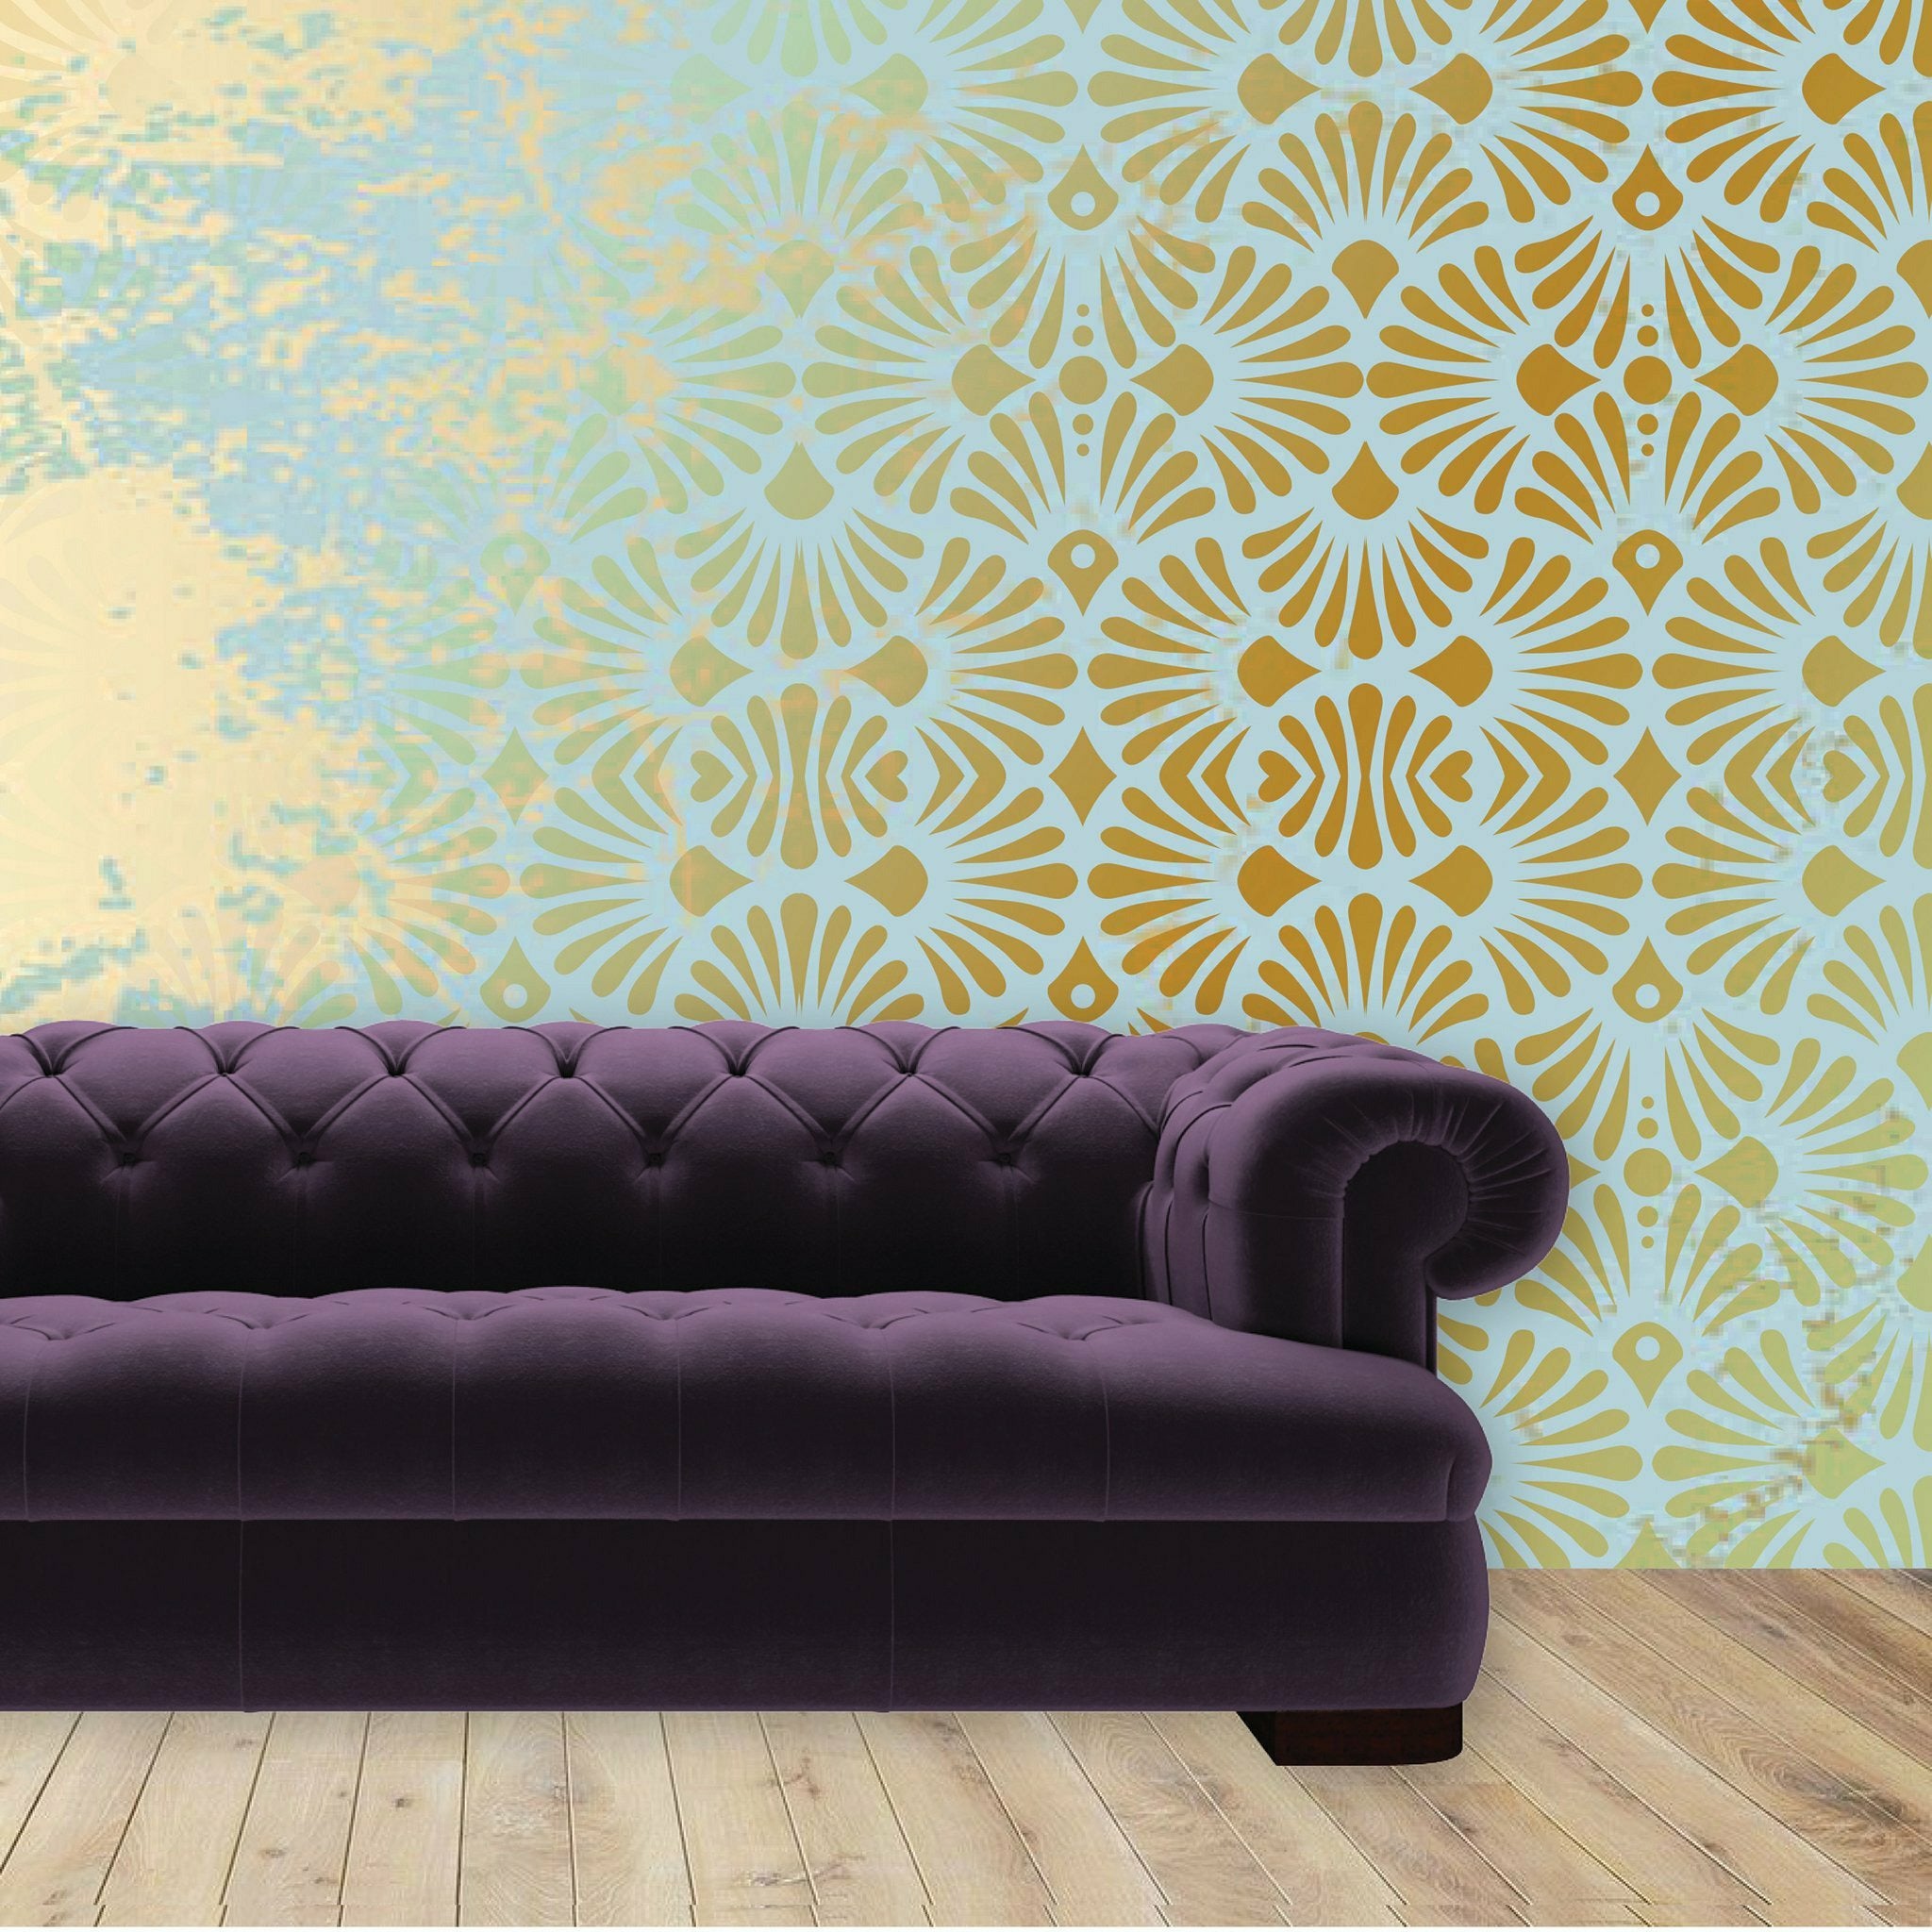 Light blue wall with the repeating fan design of the Modern Deco wall stencil in gold.